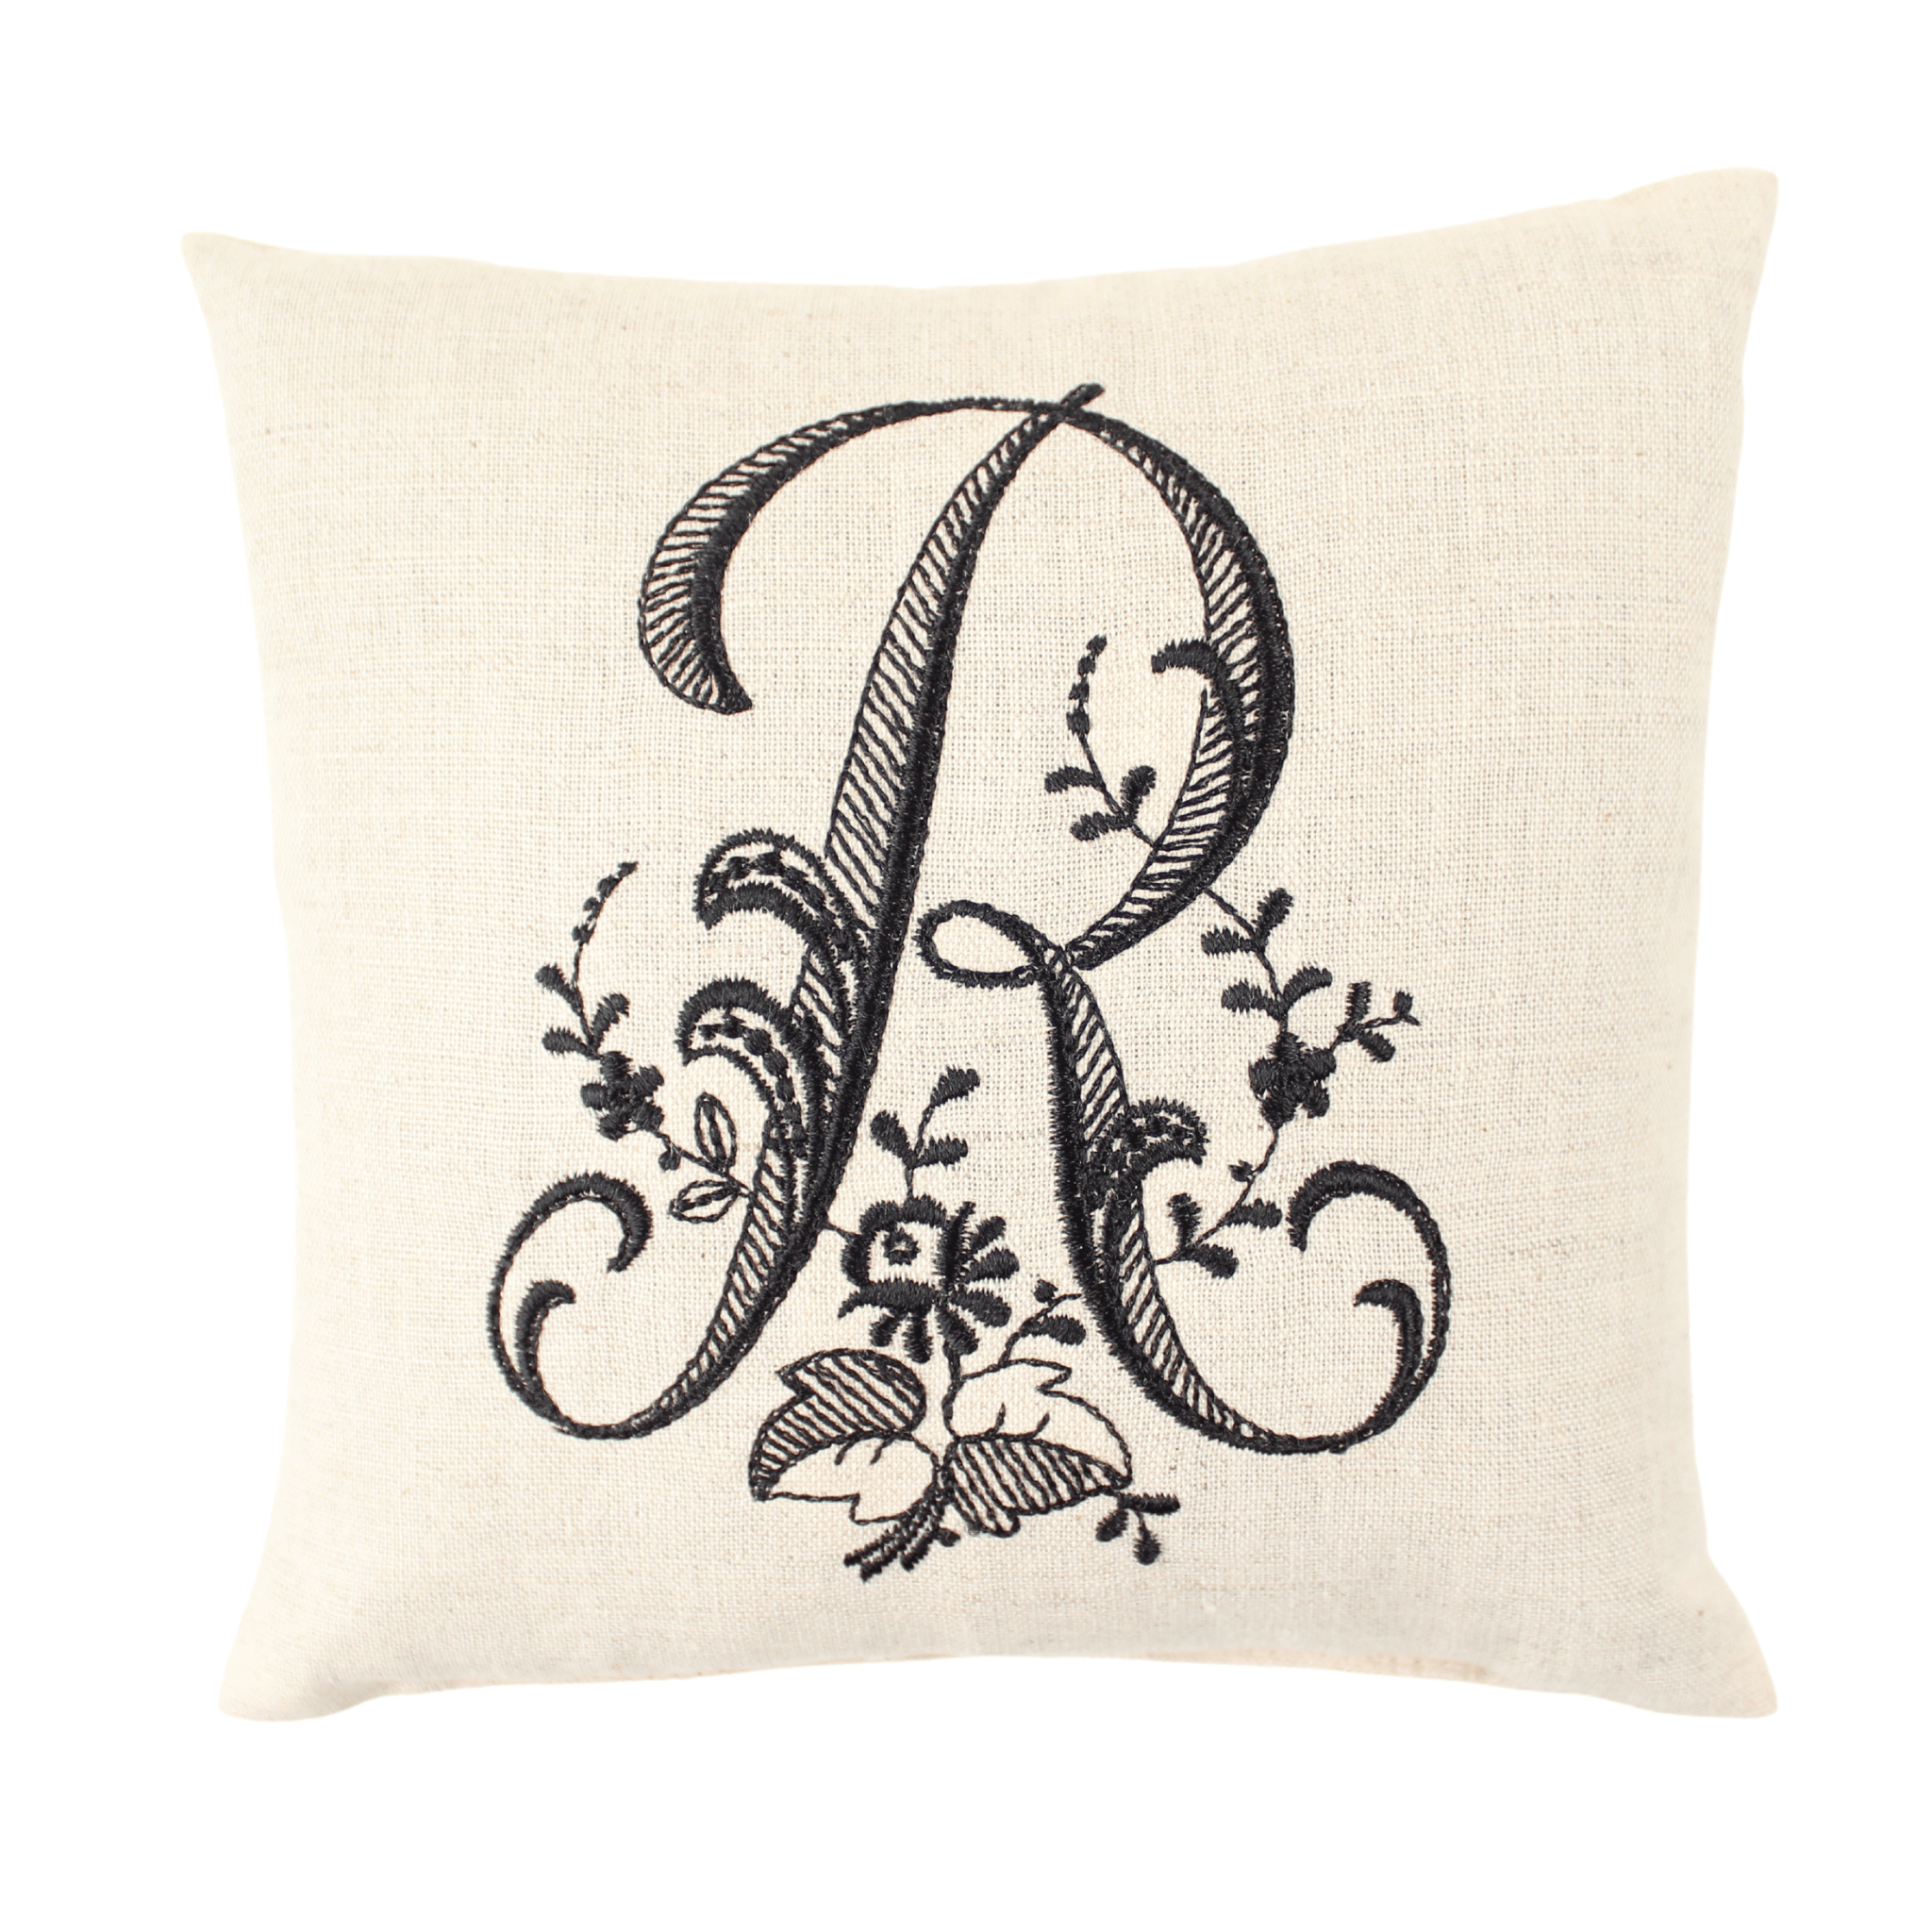 Monogrammed Pillow - Black (Letters sold individually)